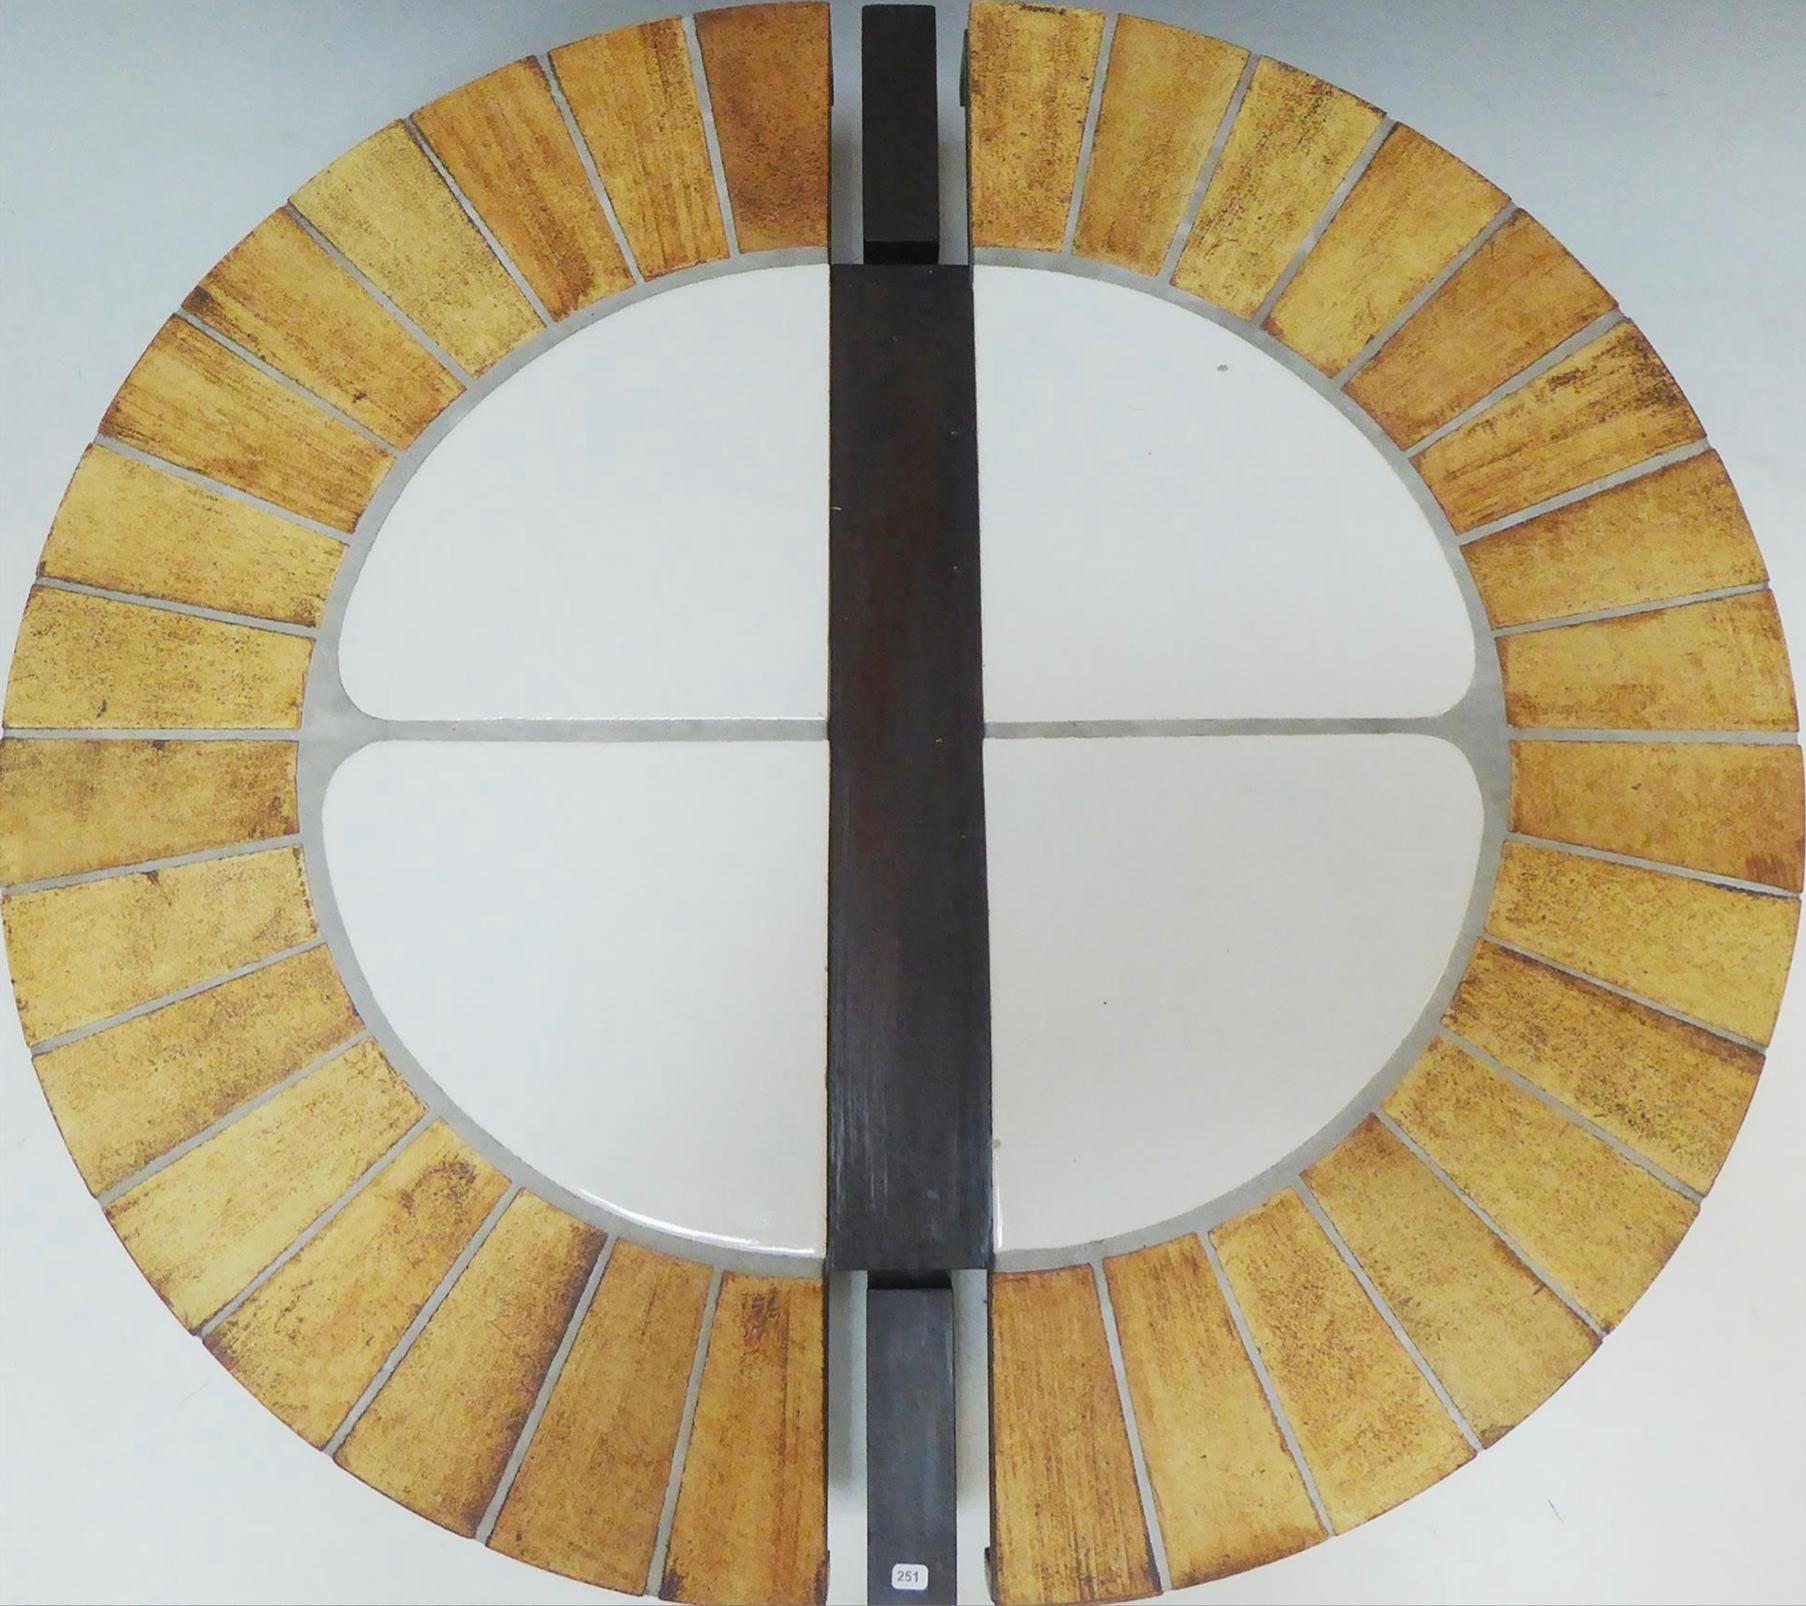 Roger Capron (1922-2006)
Rare oval coffee table 1960, model in oak and ceramic, terracotta and white glazed tiles
Signature on a terracotta tile
Dimensions: 103 x 94 x 34cm high
Perfect condition.